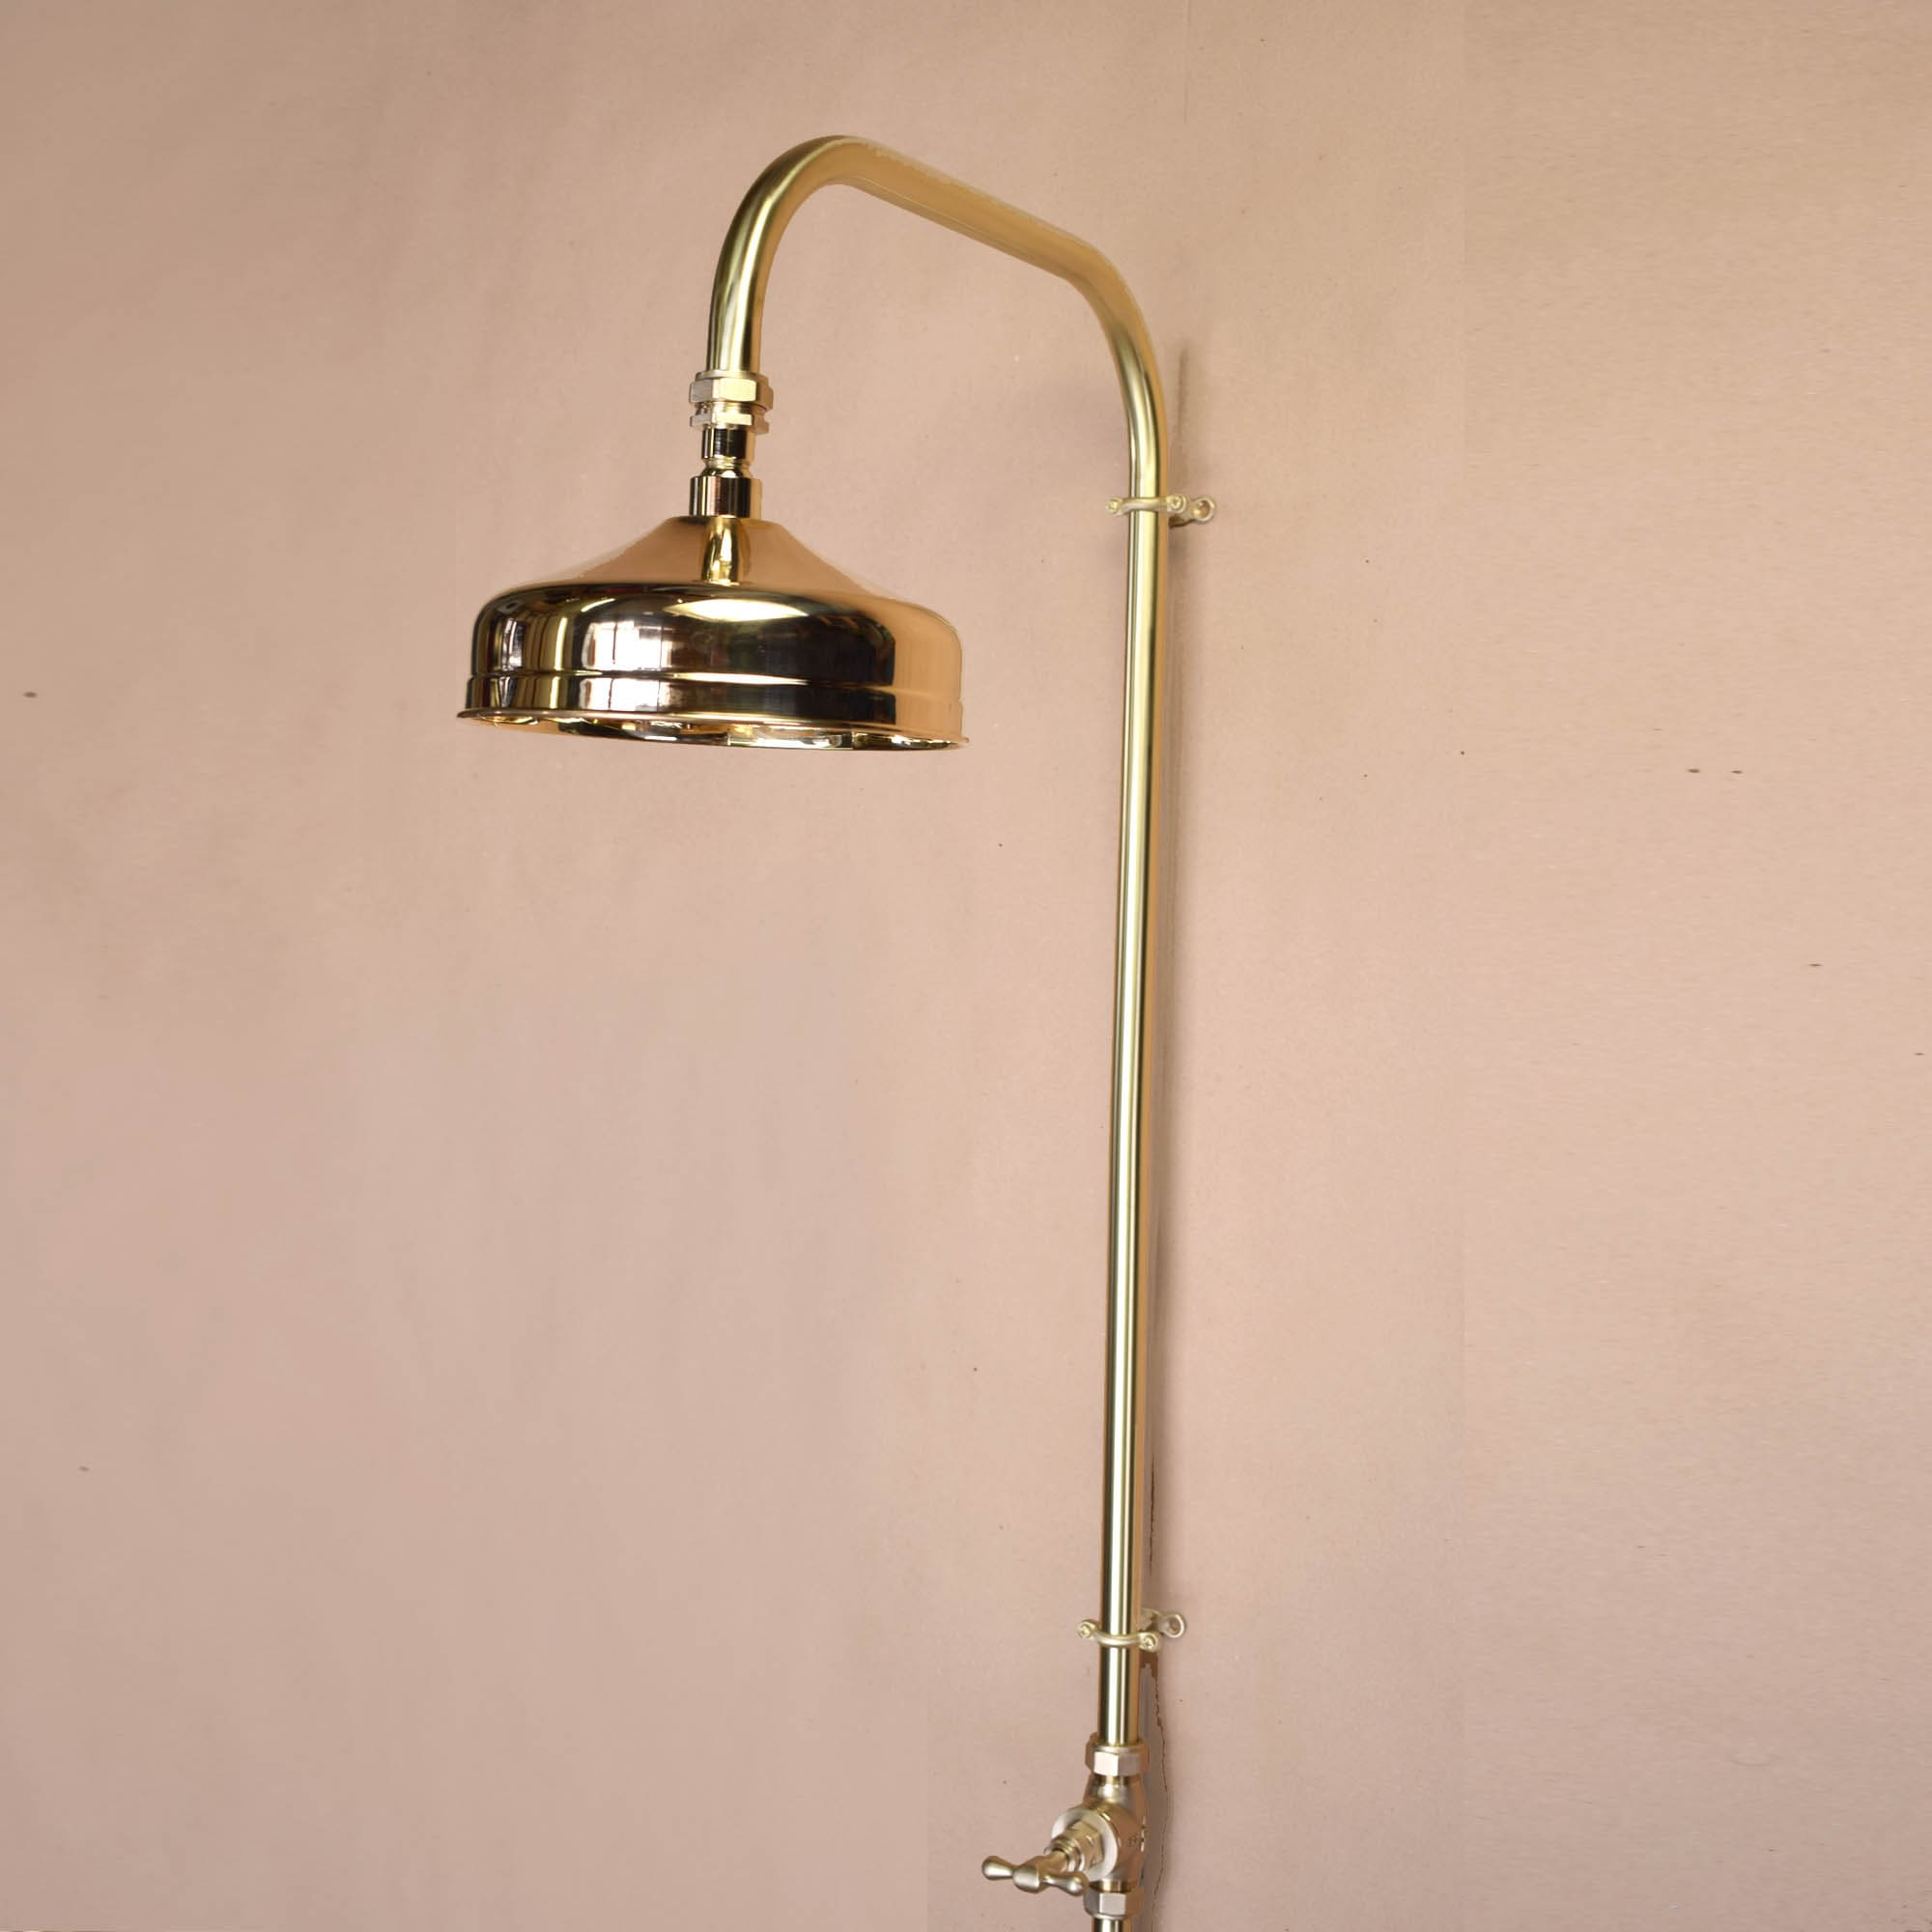 A vintage-inspired brass shower head with a classic rain spray pattern and intricate details on the face side photo